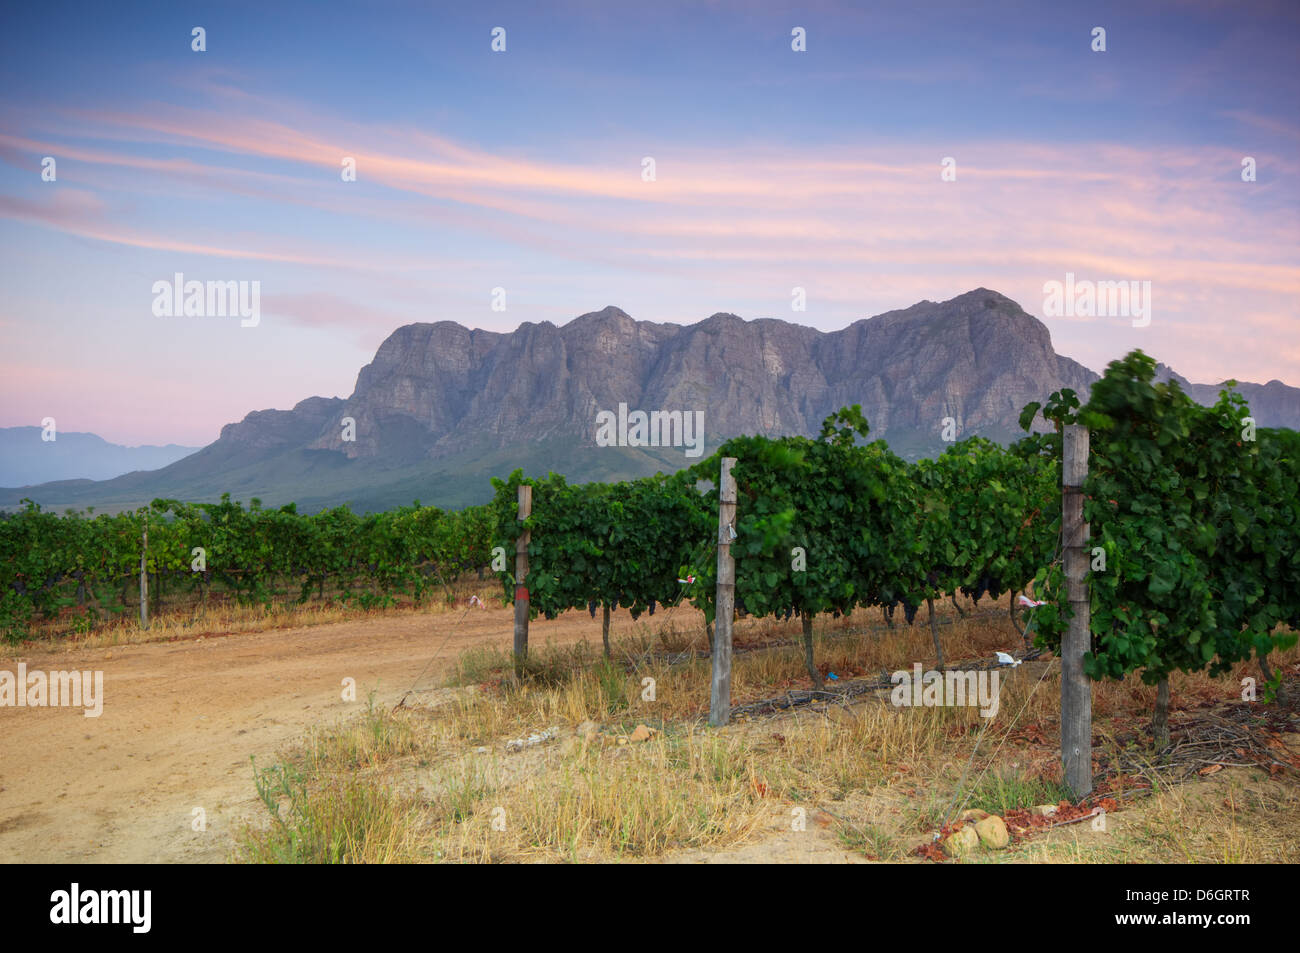 Sunset over a vineyard with Table Mountain in the background, Stellenbosch, Cape Winelands, Western Cape, South Africa Stock Photo